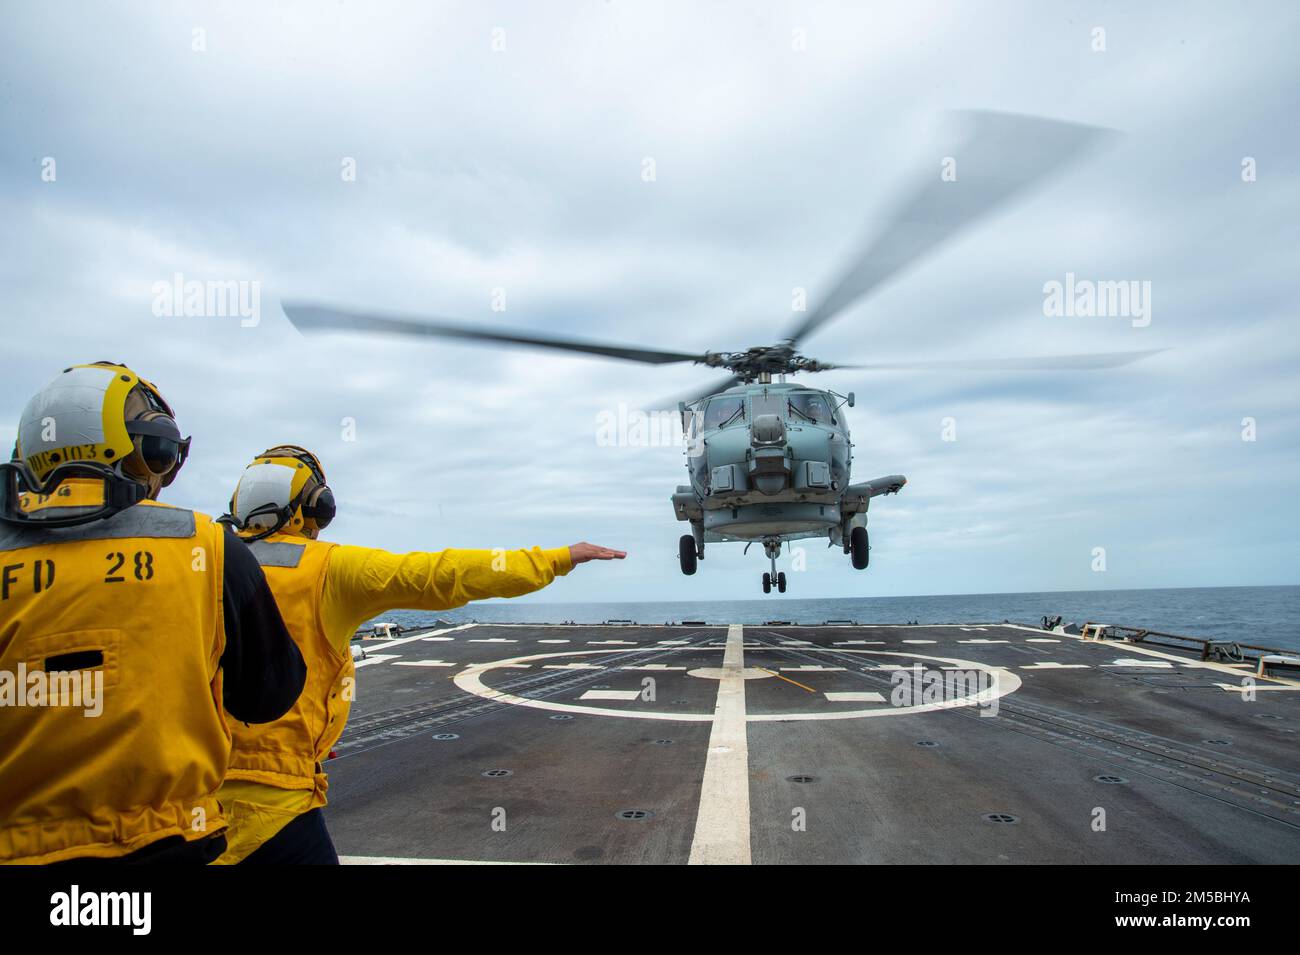 ATLANTIC OCEAN - Feb. 22, 2022 - Sailors direct an MH-60 Sea Hawk helicopter, attached to Helicopter Maritime Strike Squadron (HSM) 46, to land on the flight deck of the guided-missile destroyer USS Truxtun (DDG 103) while underway for Surface Warfare Advanced Tactical Training (SWATT). Truxtun is part of Destroyer Squadron (DESRON) 26 which supports Carrier Strike Group (CSG) 10. SWATT is led by the Naval Surface and Mine Warfighting Development Center (SMWDC) and is designed to increase warfighting proficiency, lethality and interoperability of participating units. Stock Photo